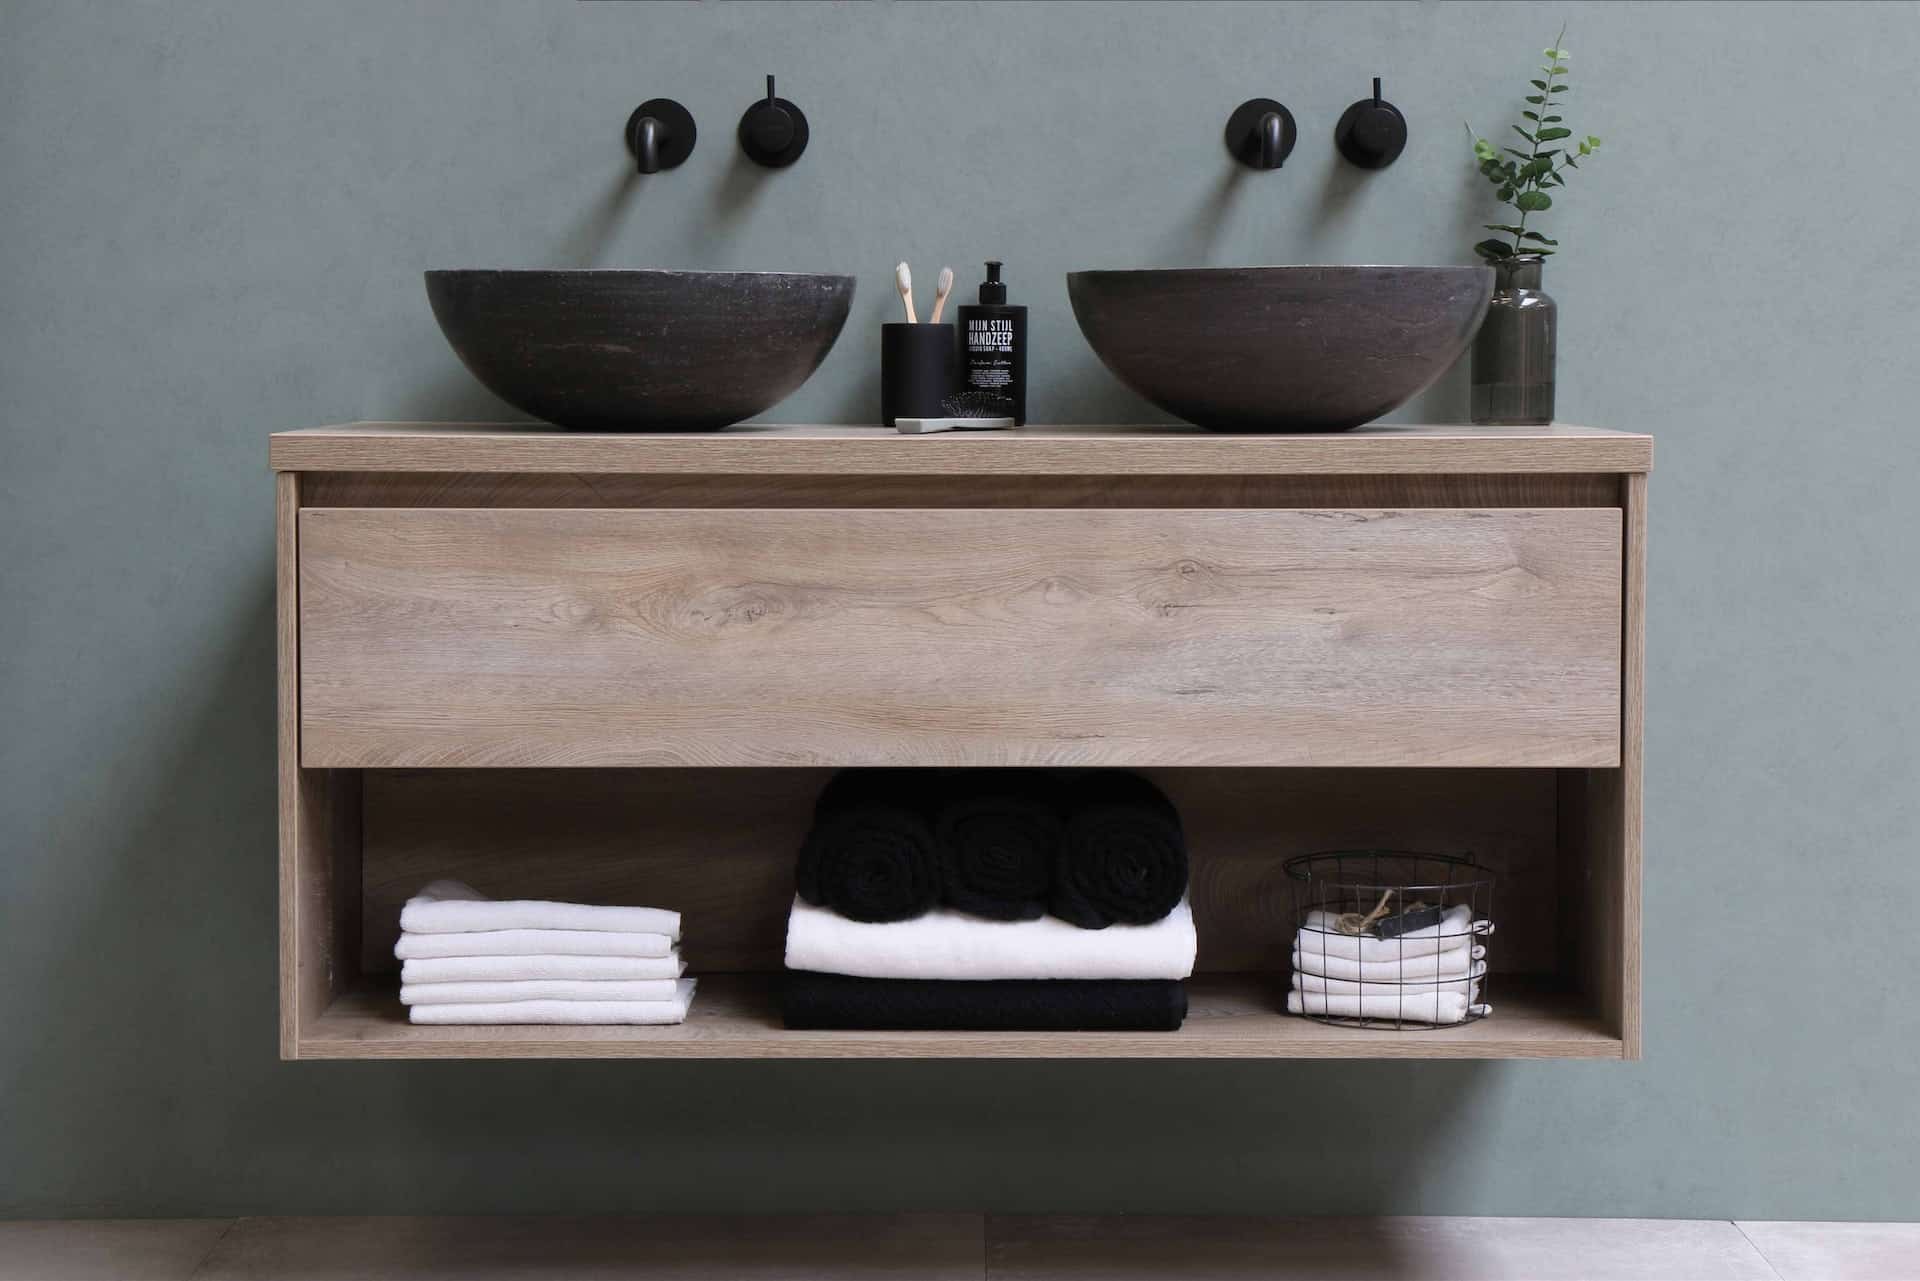 10 Excellent Tips For Using & Creating Bathroom Shelving